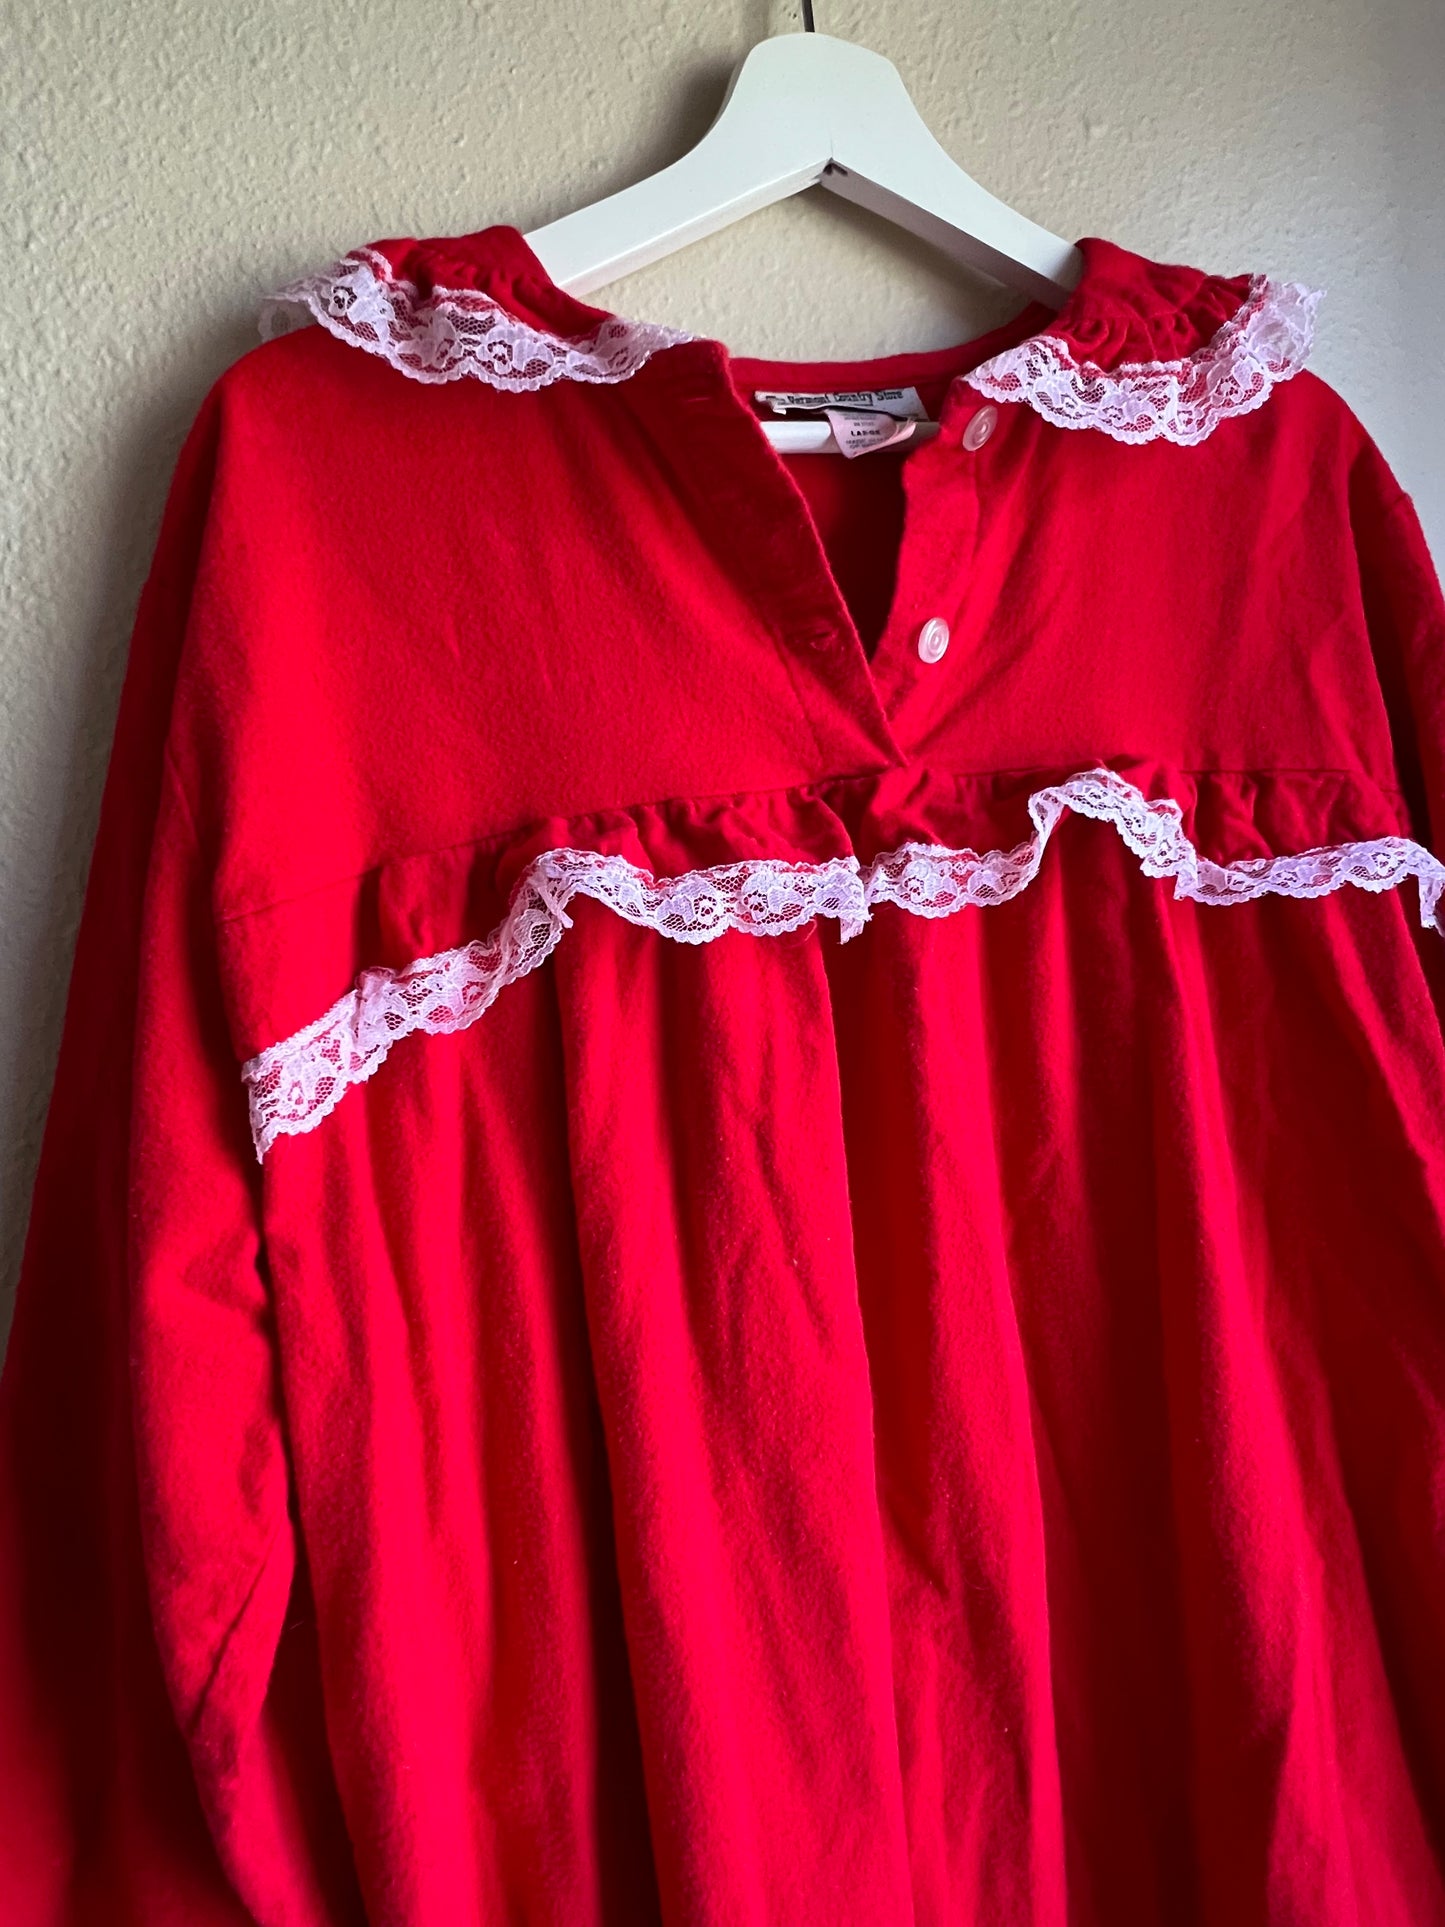 Vintage Red Cozy Nightgown/Dress